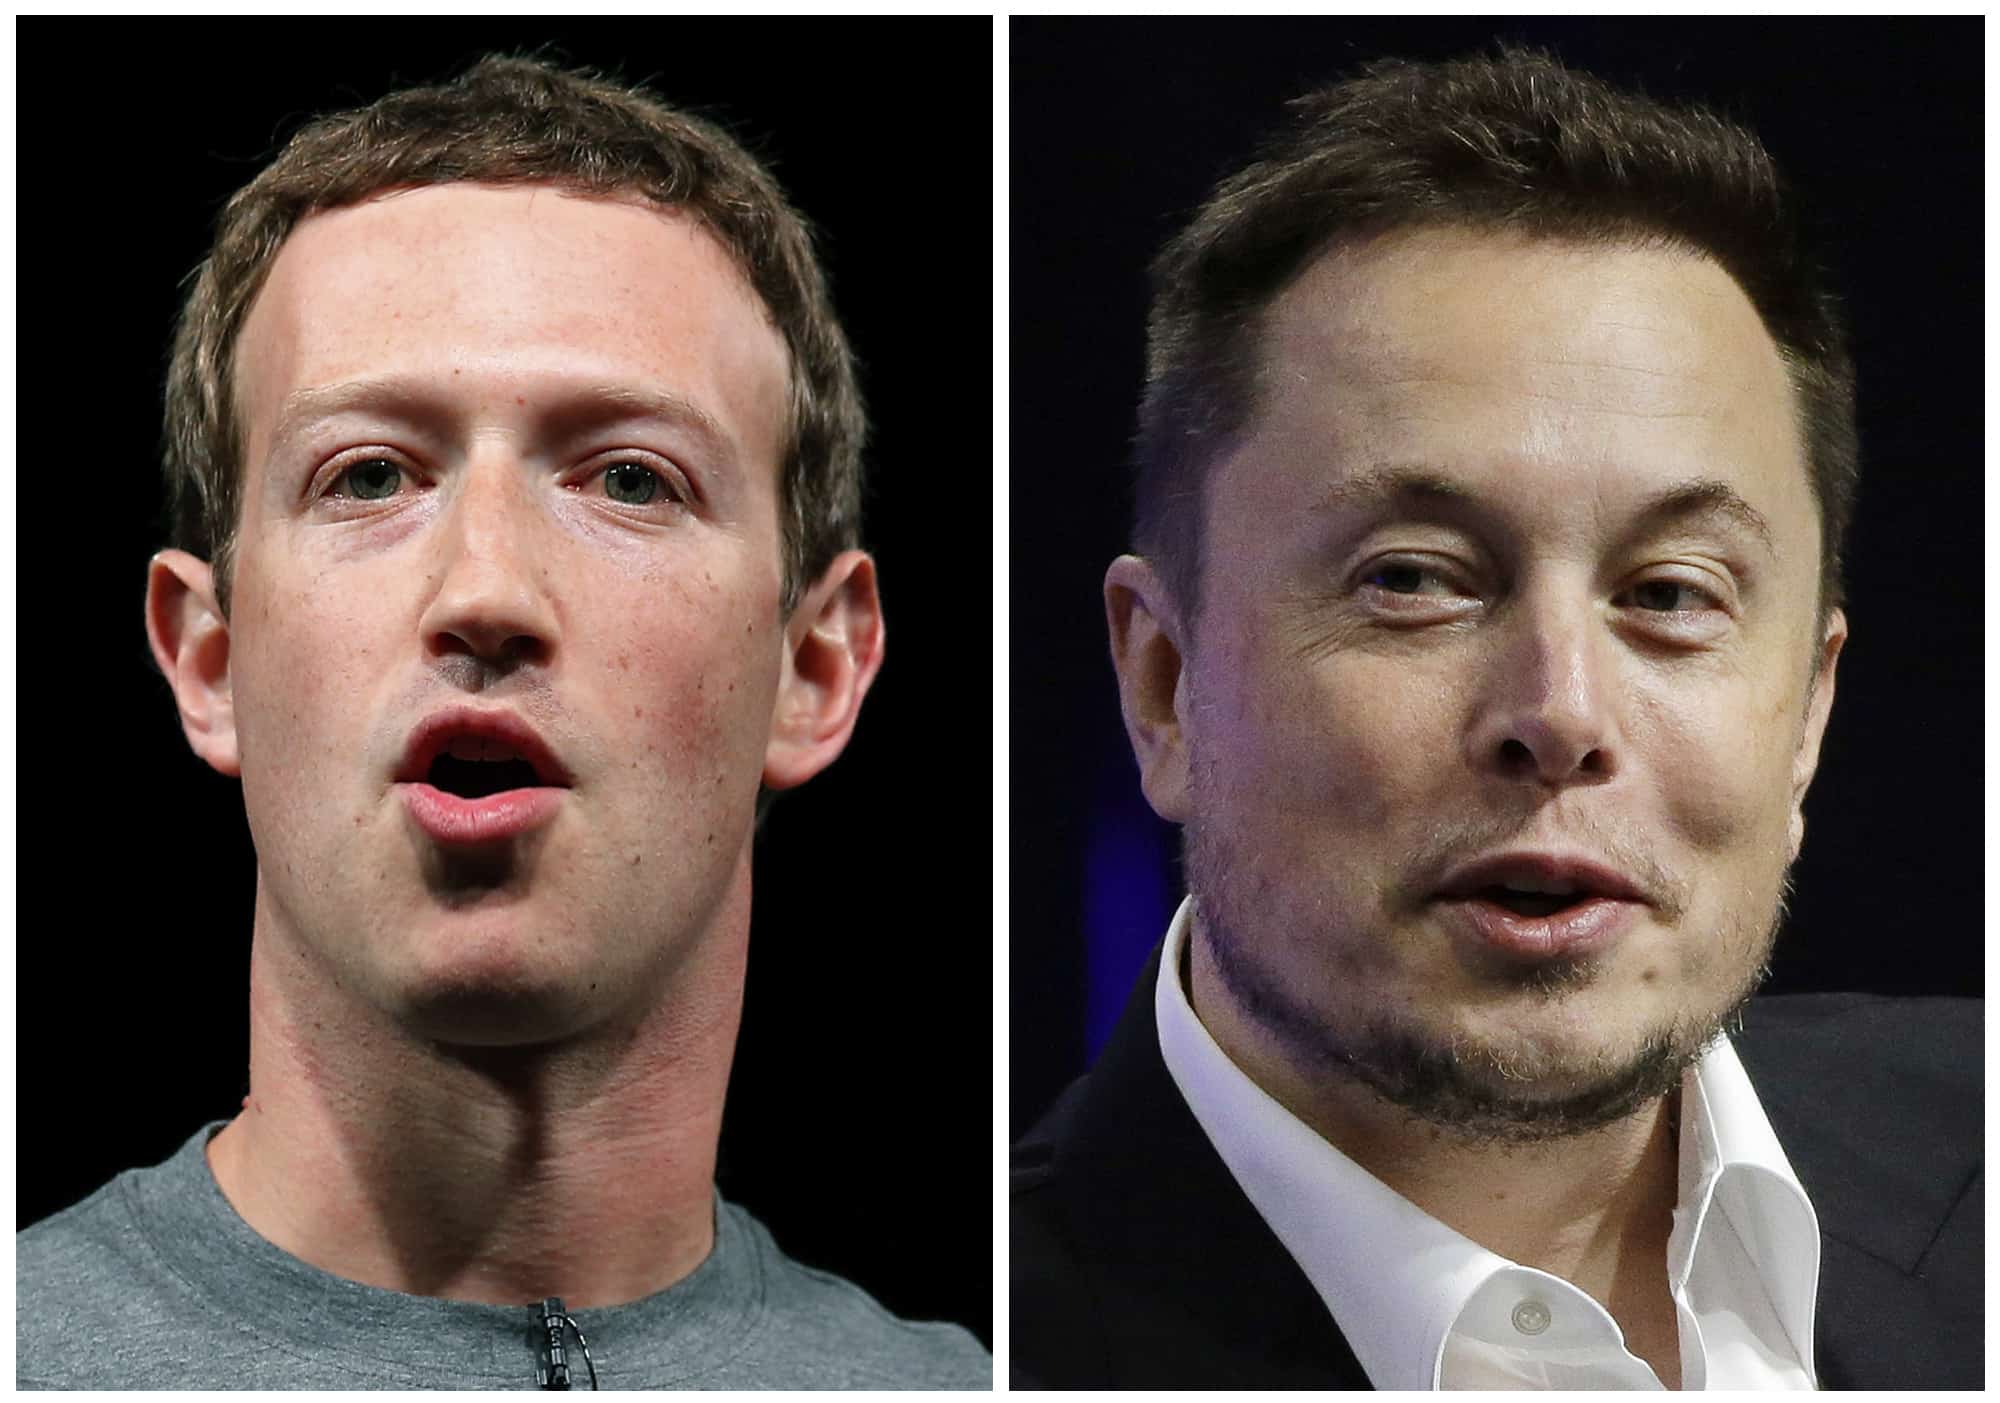 Zuckerberg says he’s secured venue for cage fight – but Musk isn’t interested